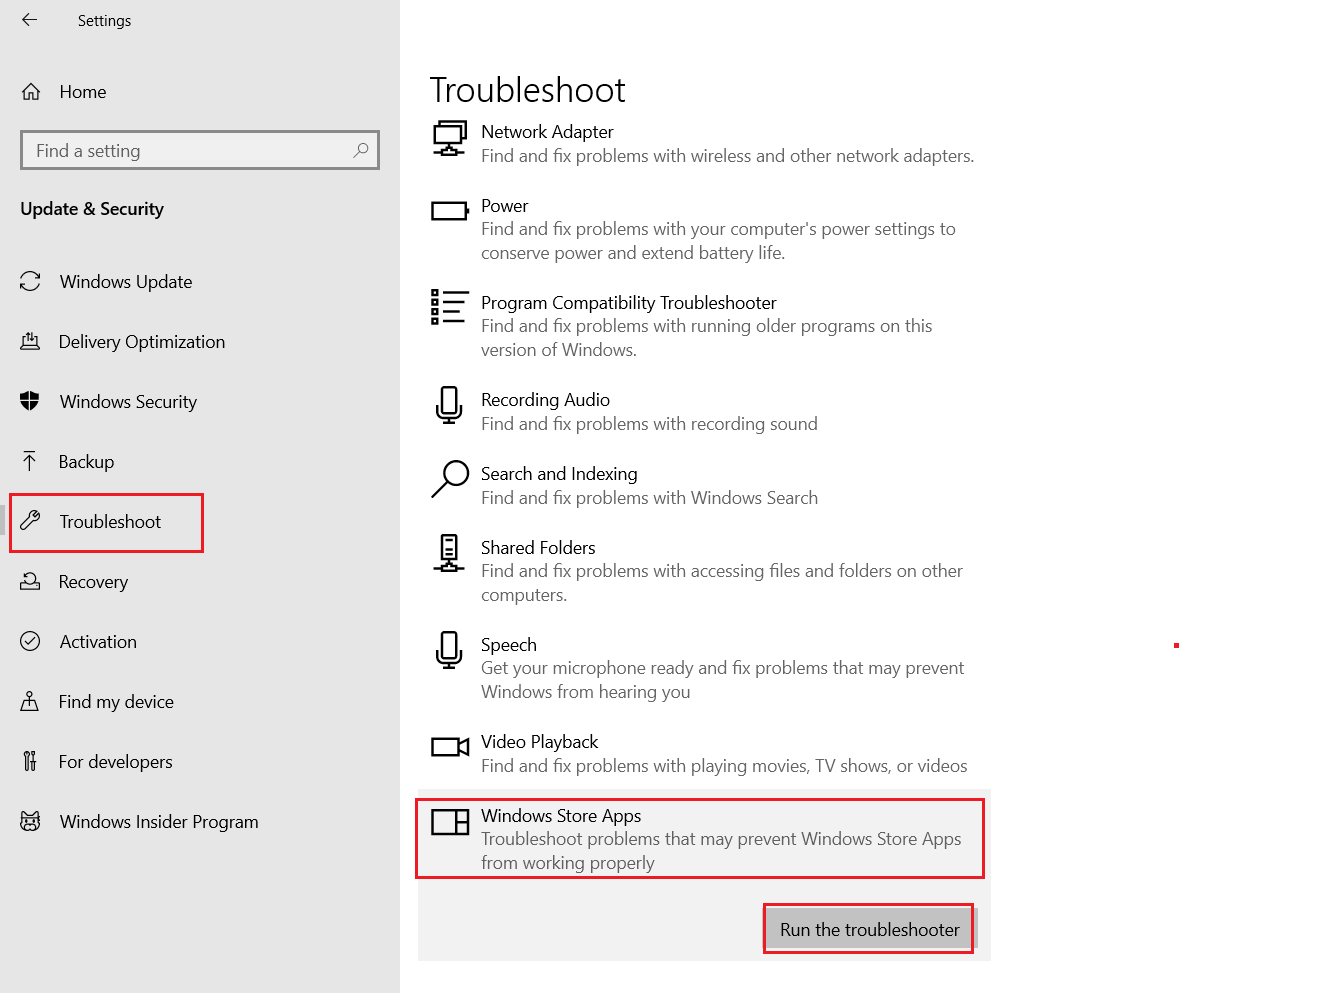 Scroll down and select Windows Store Apps and click on Run the troubleshooter in Troubleshoot menu